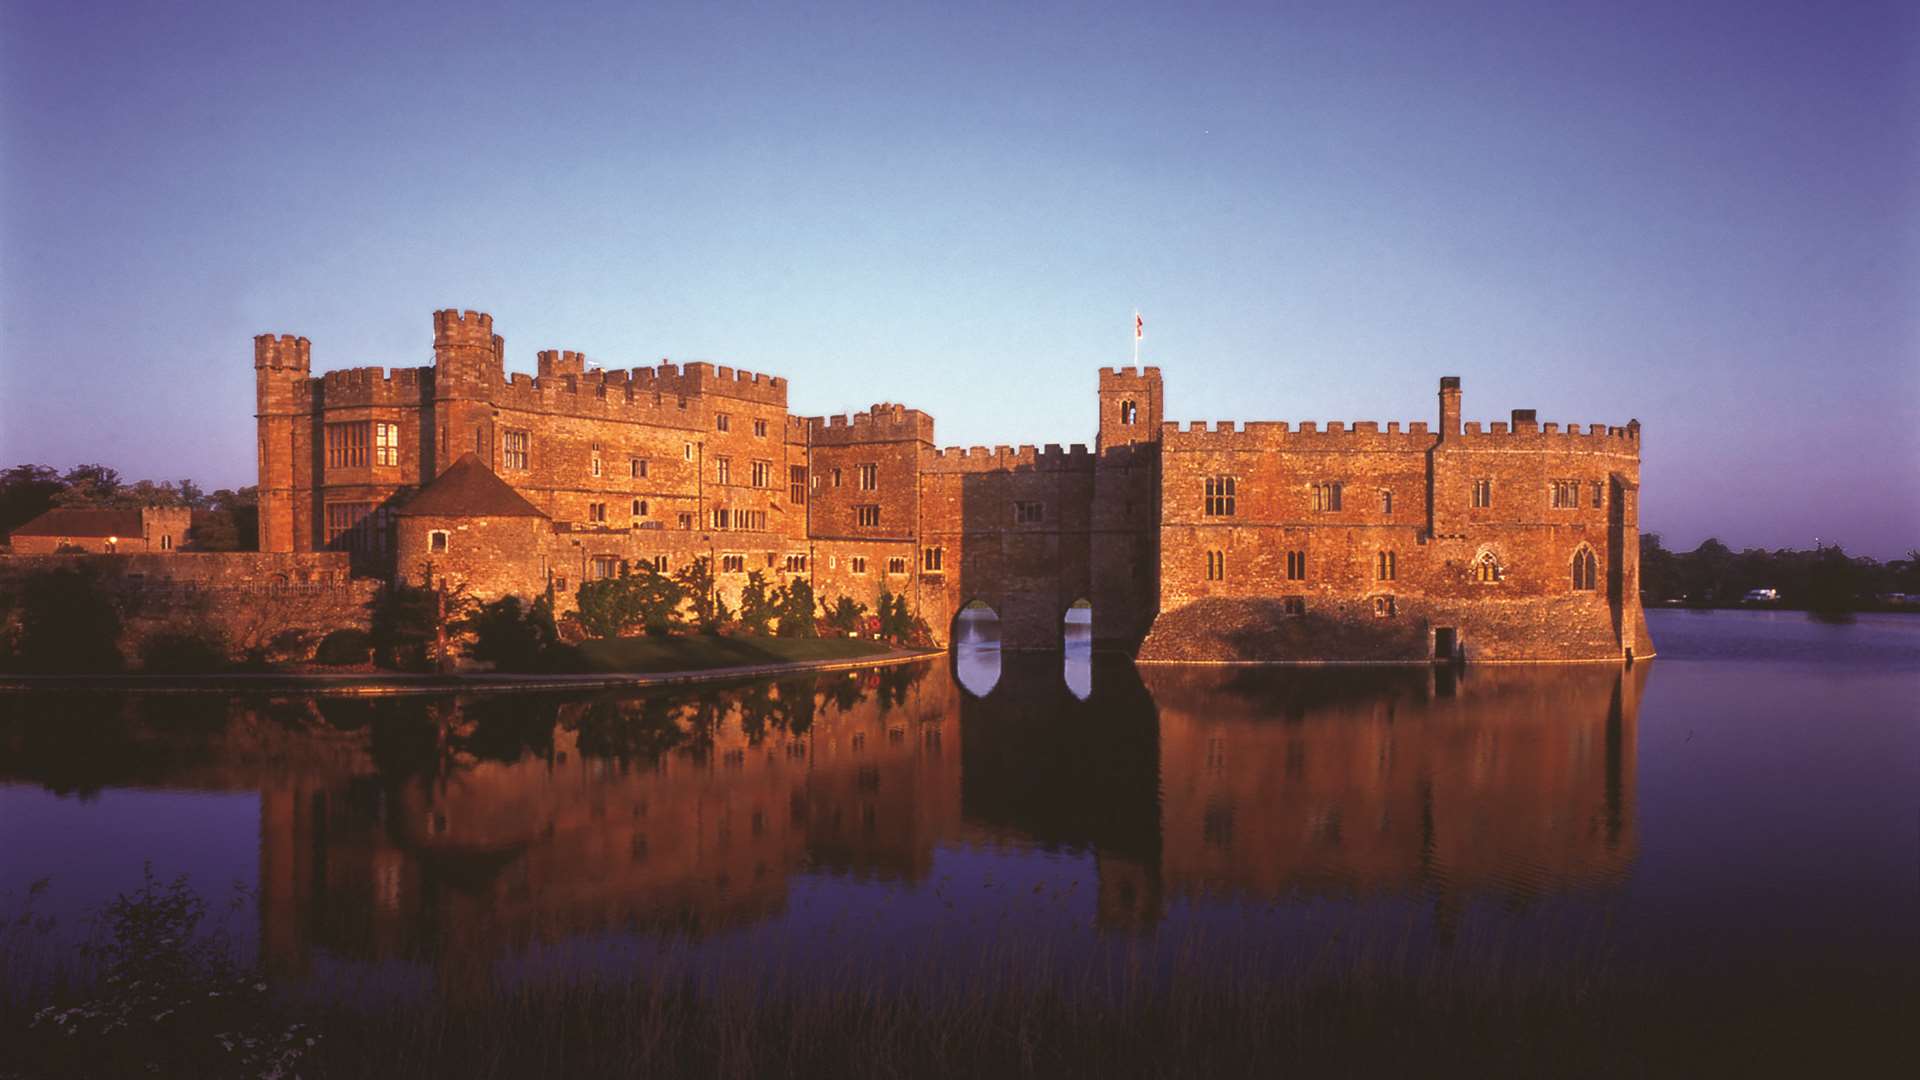 Leeds castle will provide a special backdrop for the film